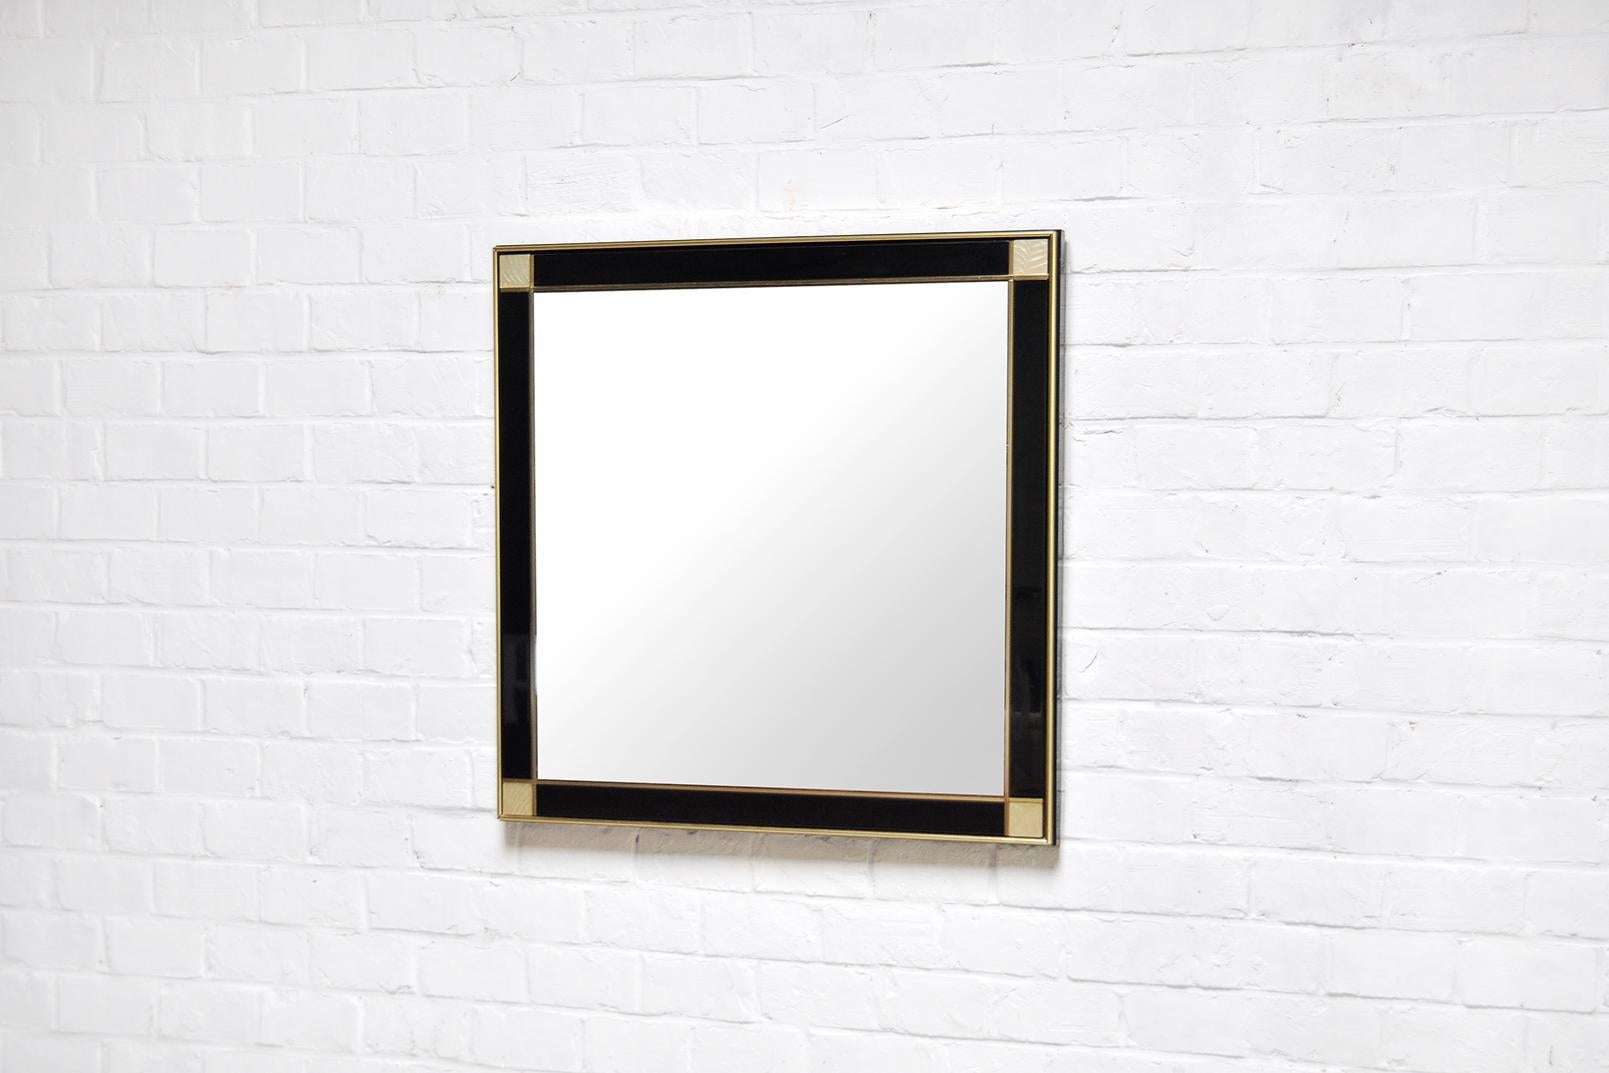 Hollywood Regency Pierre Cardin Black Lacquered Mirror with Brass Details, 1980s